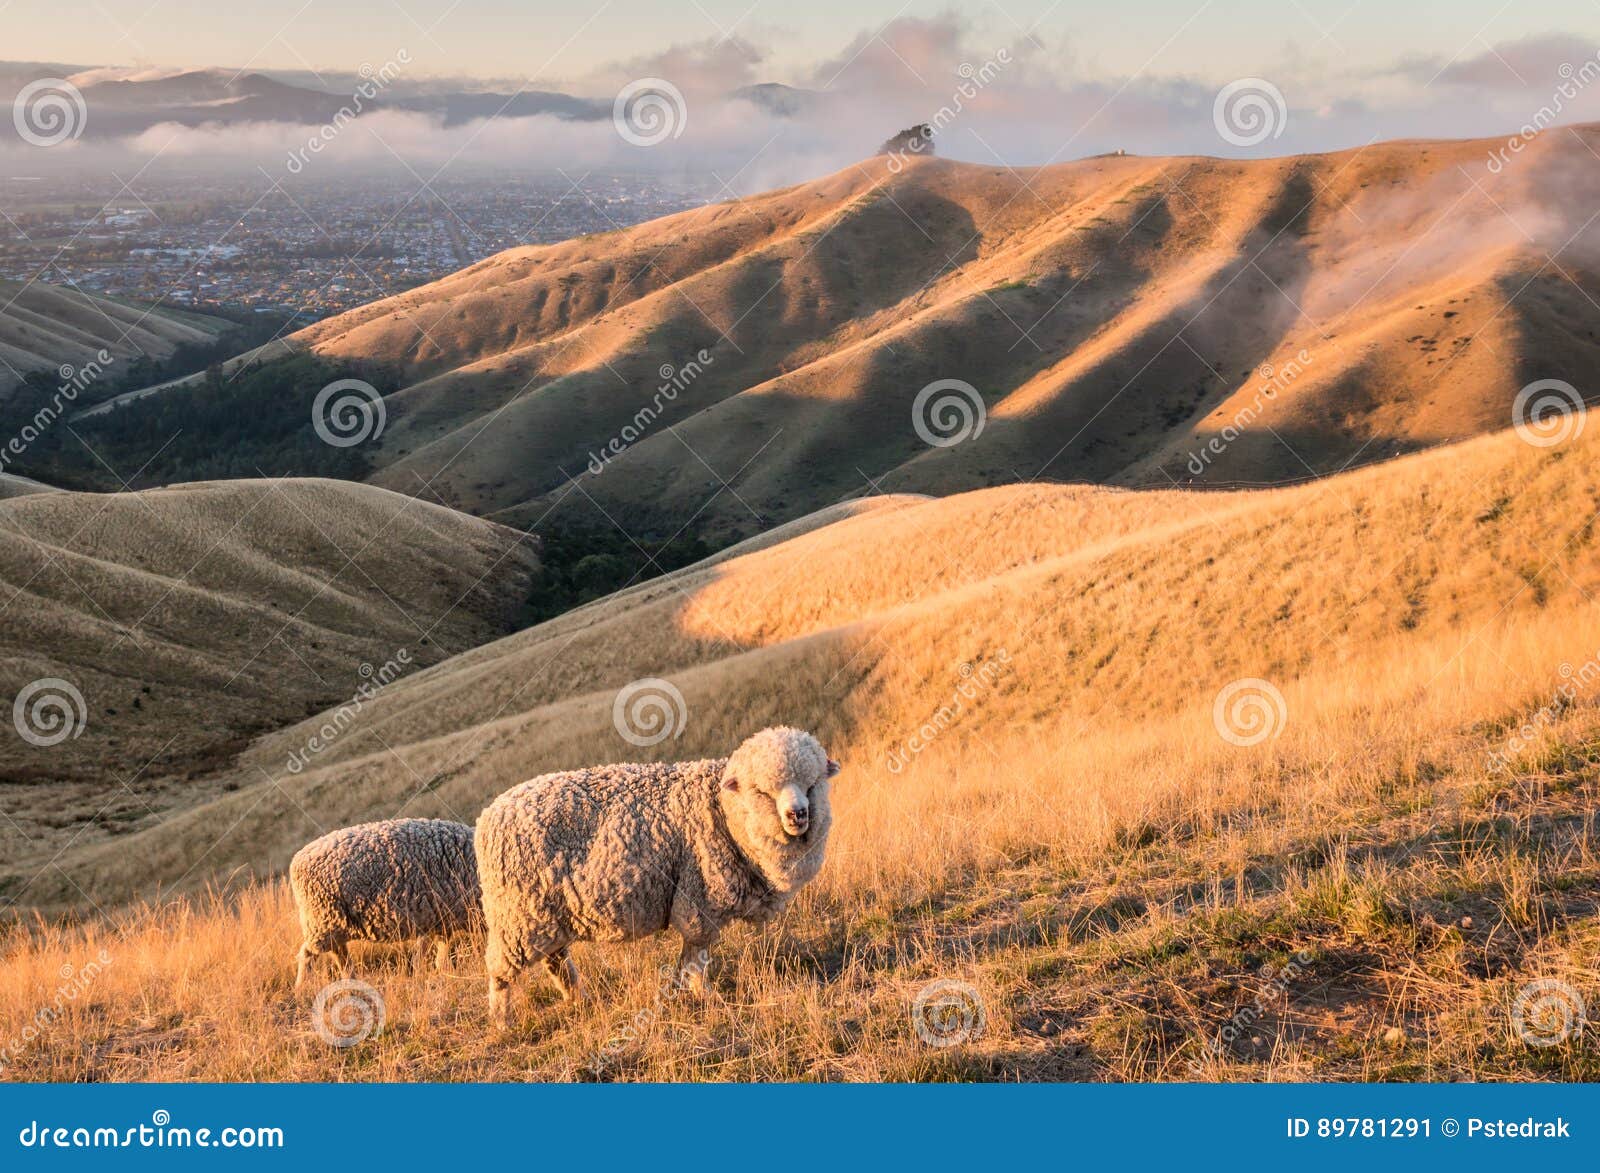 merino sheep grazing on wither hills in new zealand at sunset